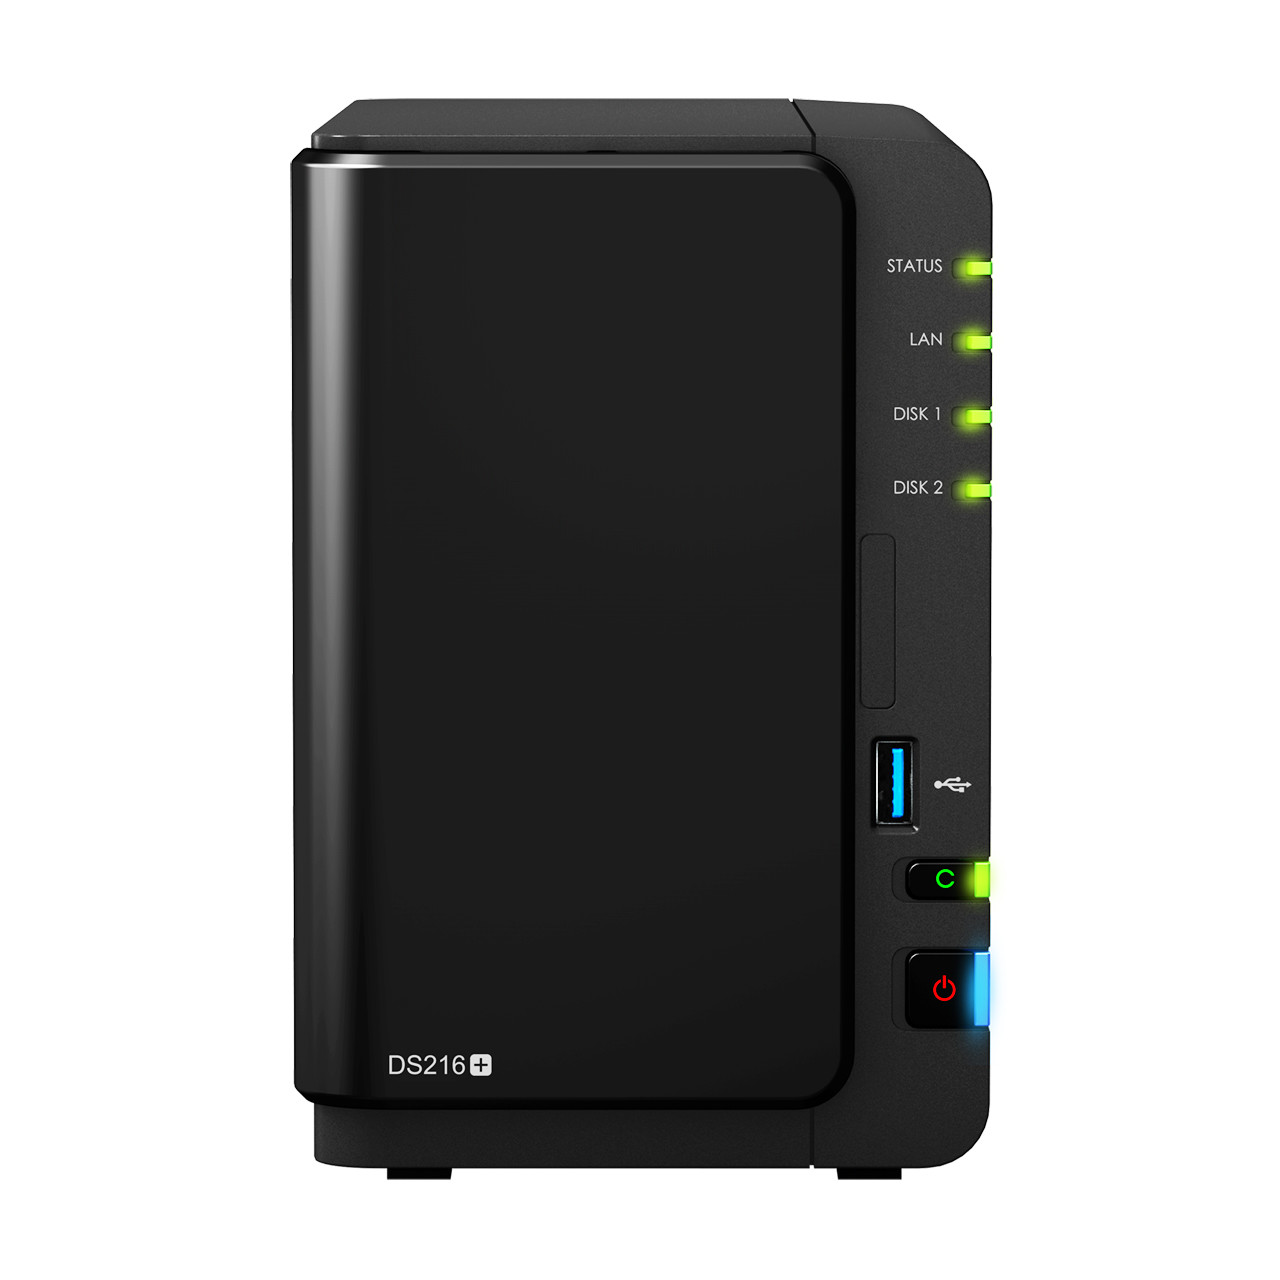 Synology Introduces DiskStation DS216+ NAS | TechPowerUp Forums